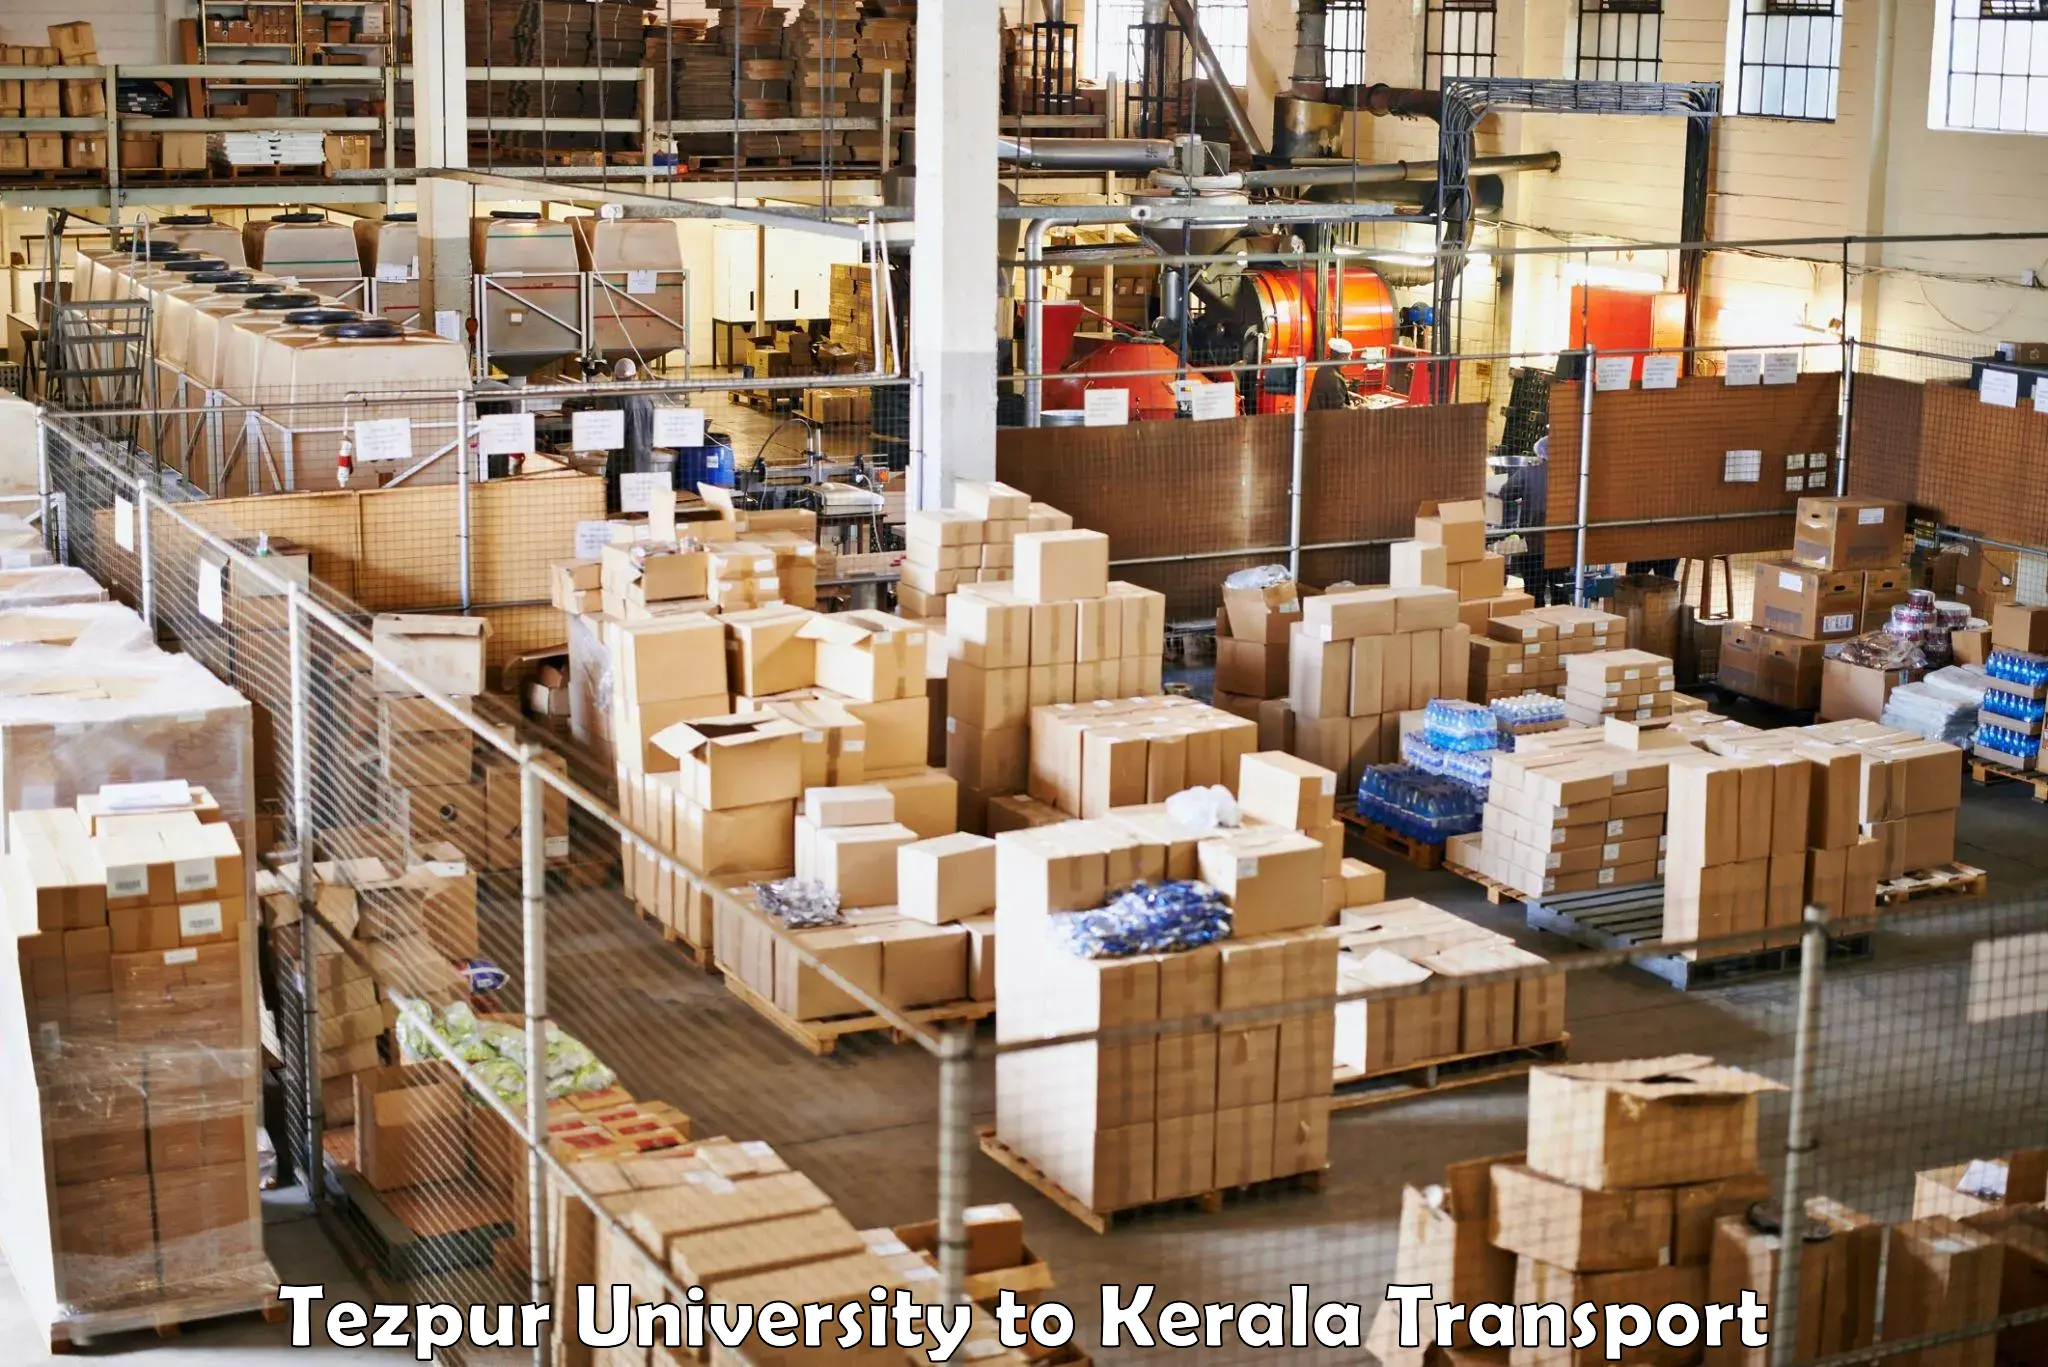 Vehicle transport services Tezpur University to Cochin University of Science and Technology